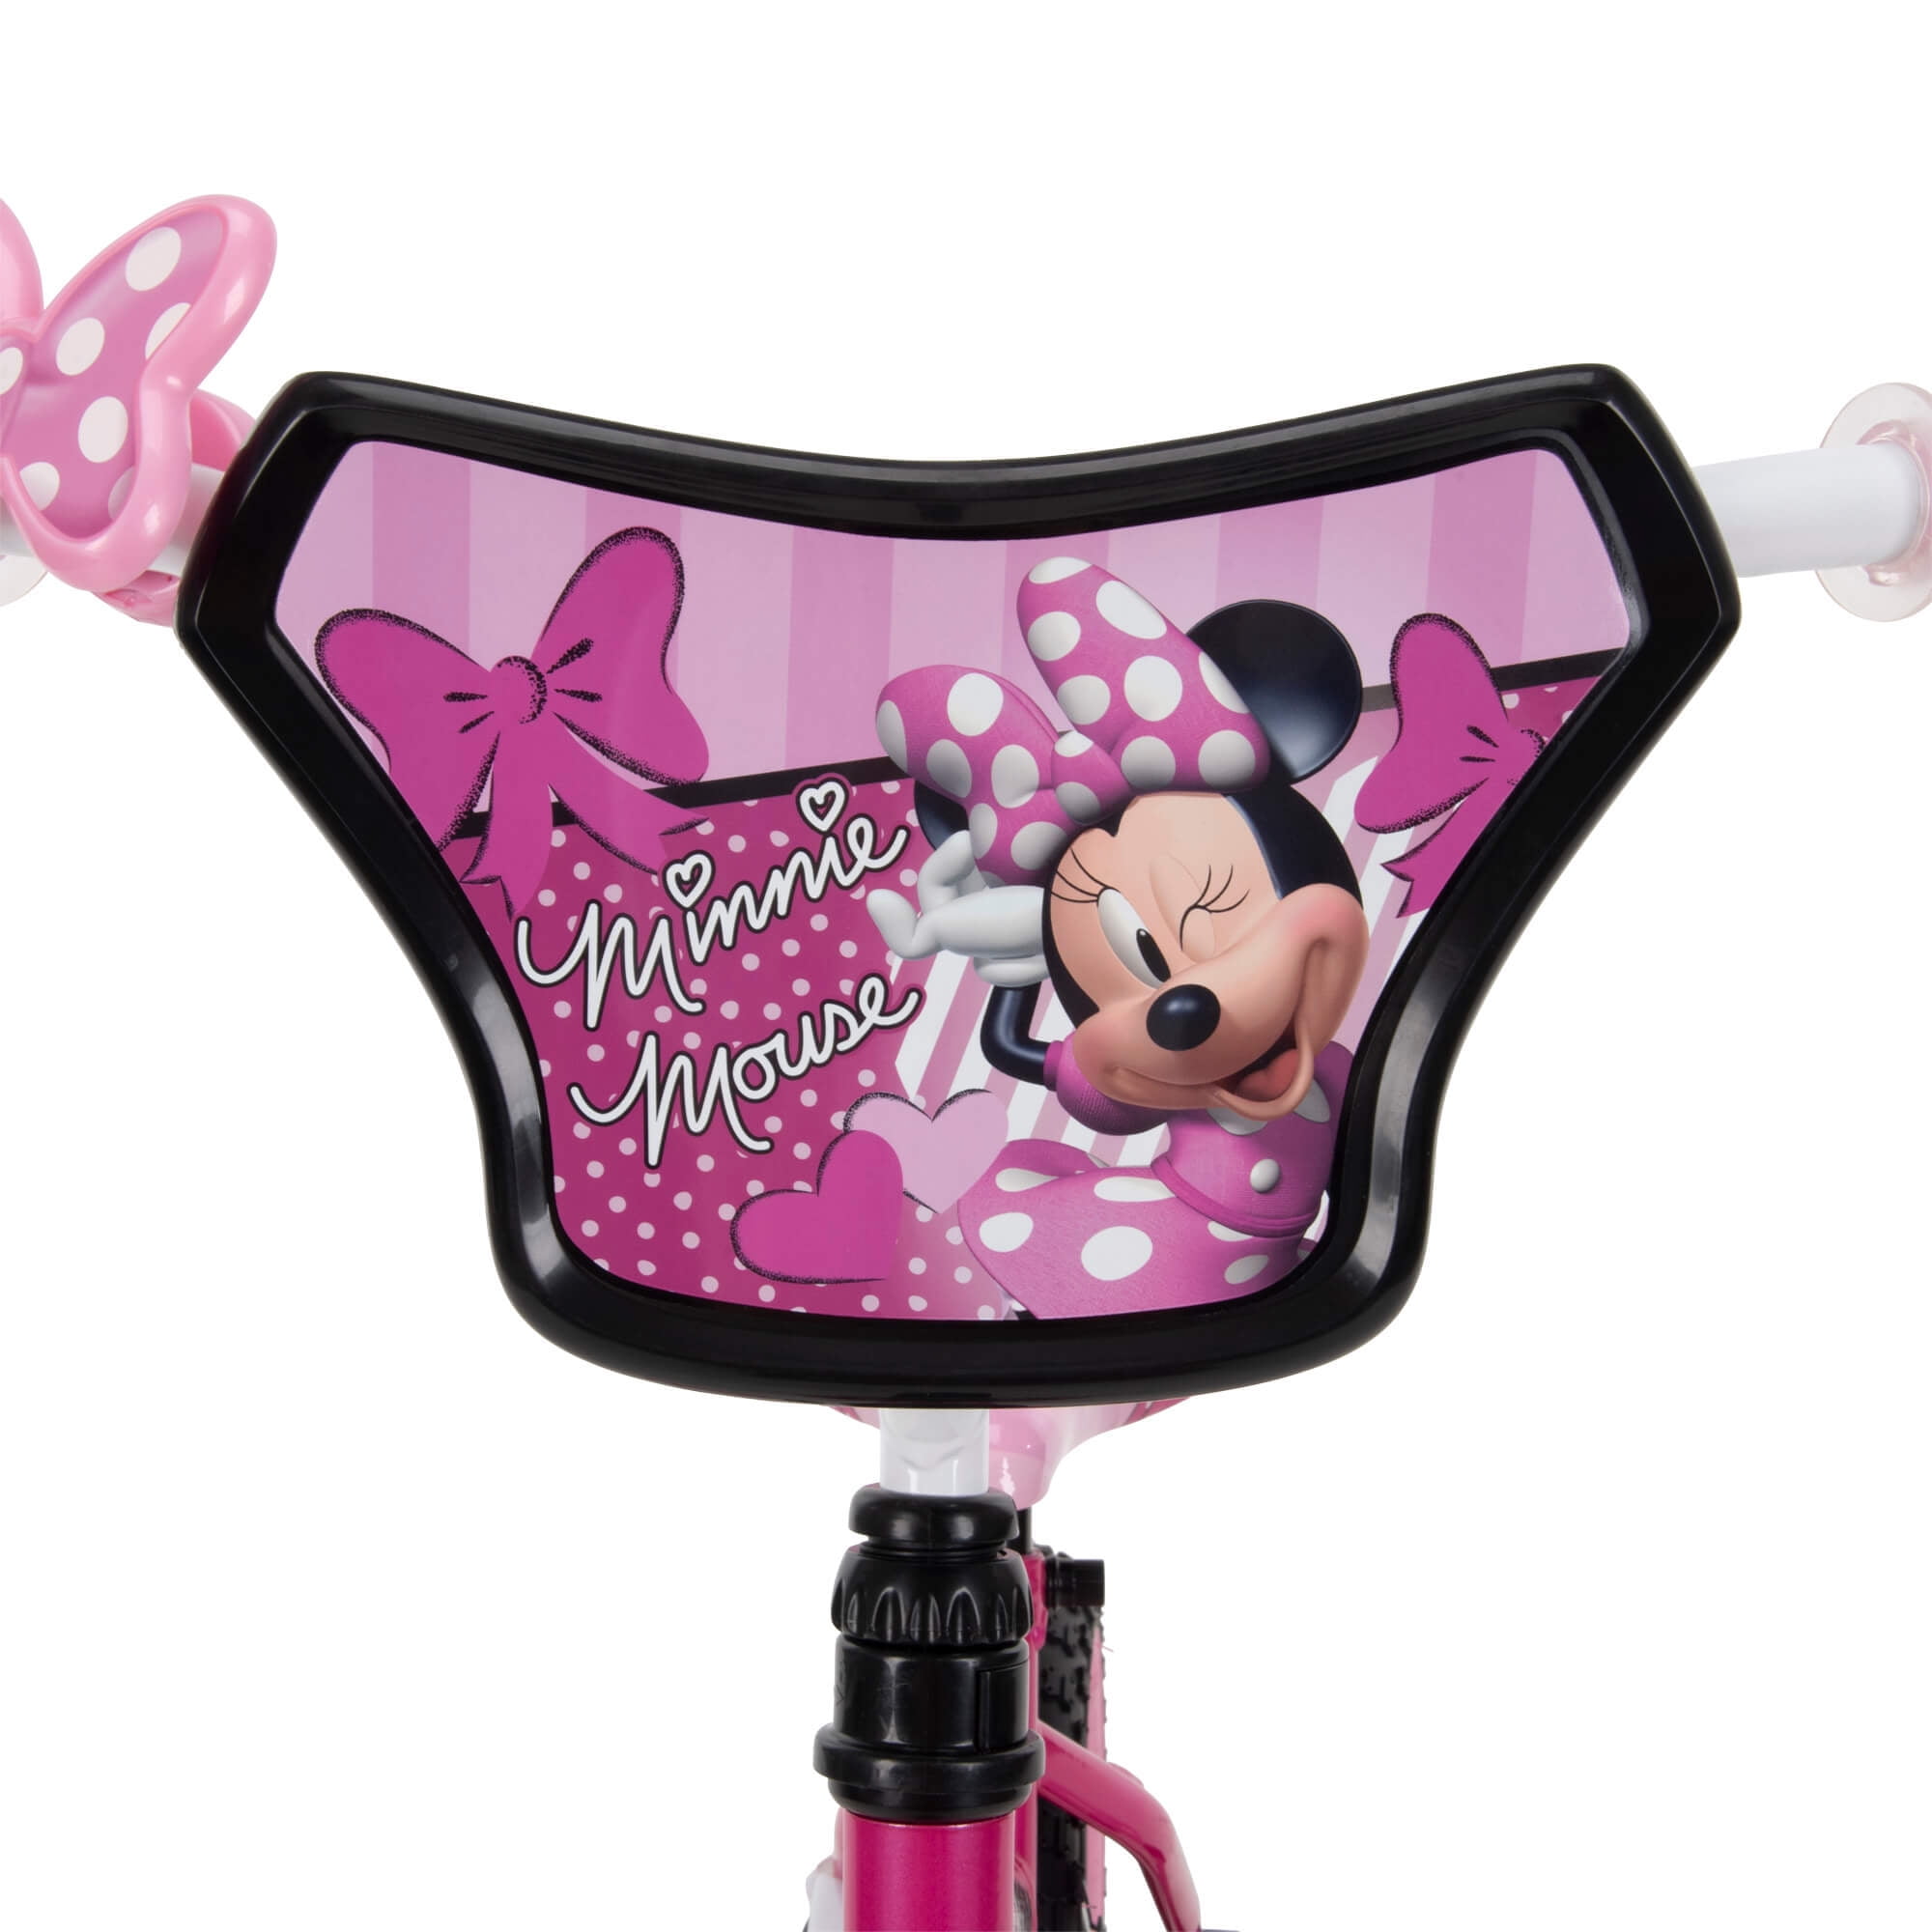 Disney 12 In. Minnie Mouse Bike for Girl's by Huffy - 3